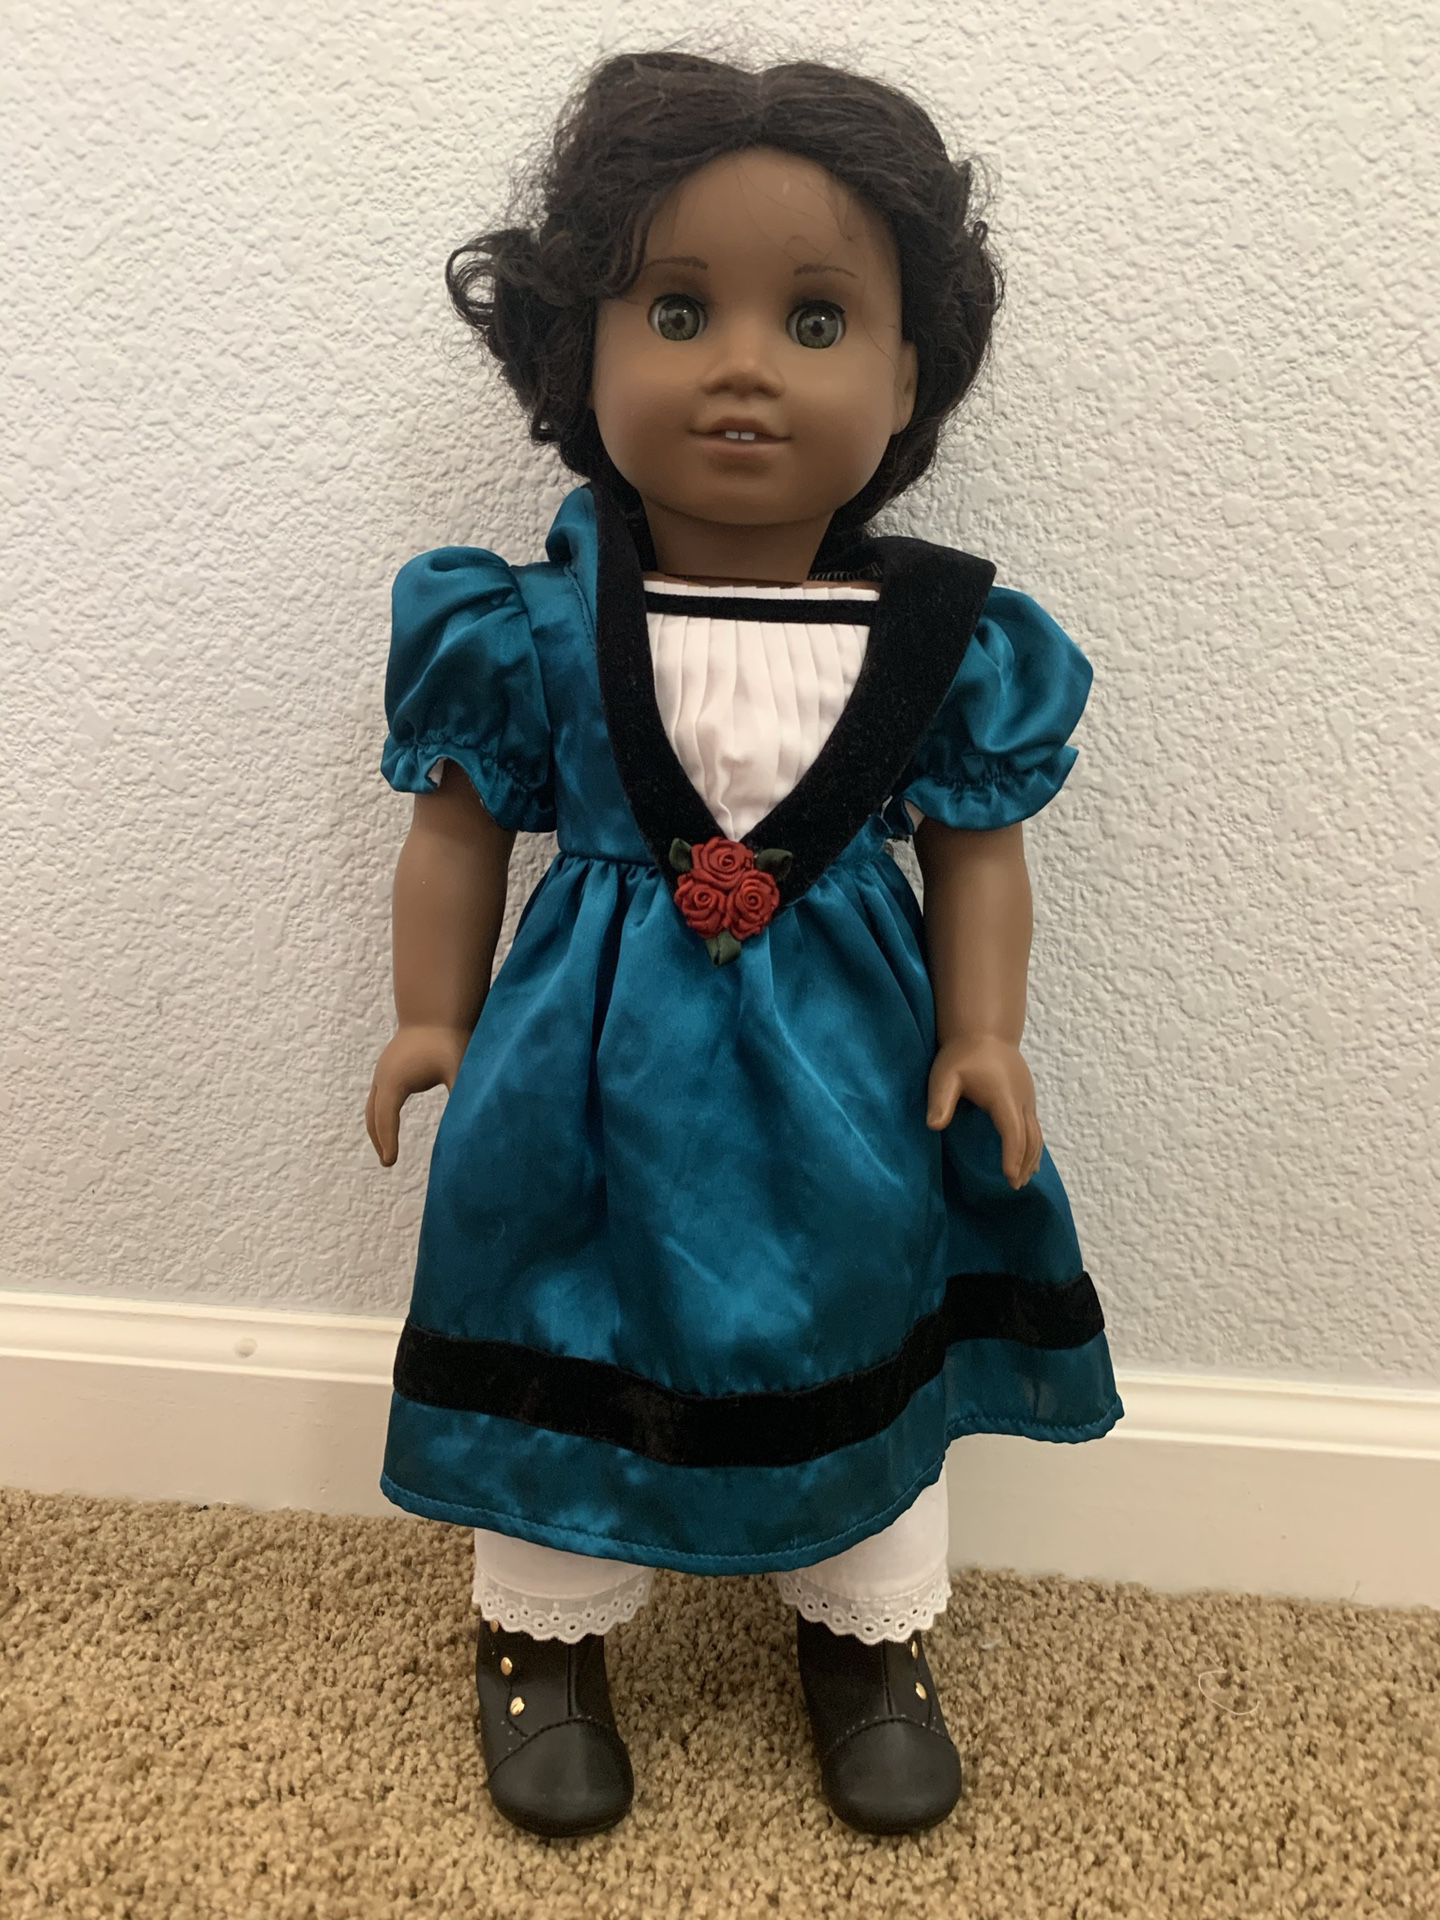 Cecile Rey a historical American Girl Doll